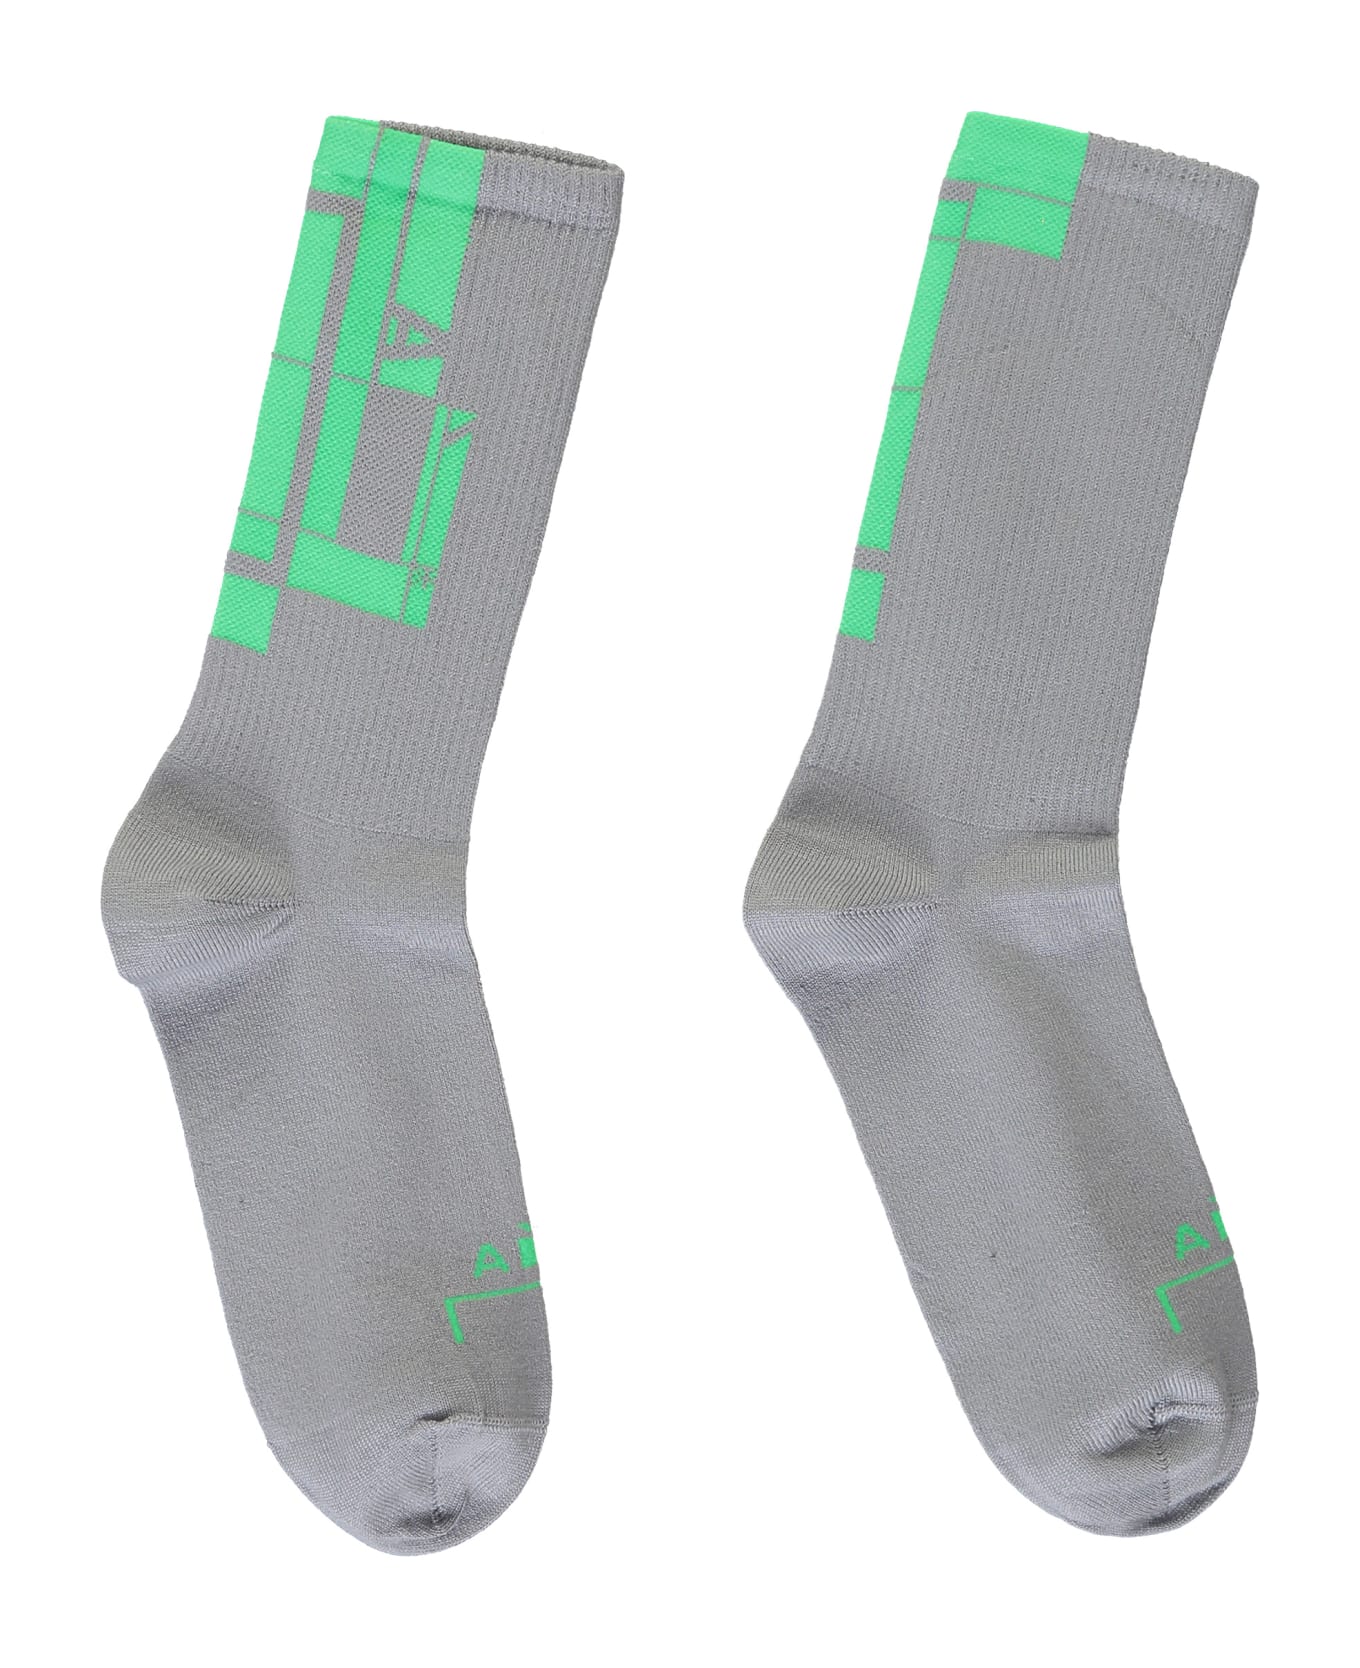 A-COLD-WALL Cotton Socks With Logo - grey 靴下